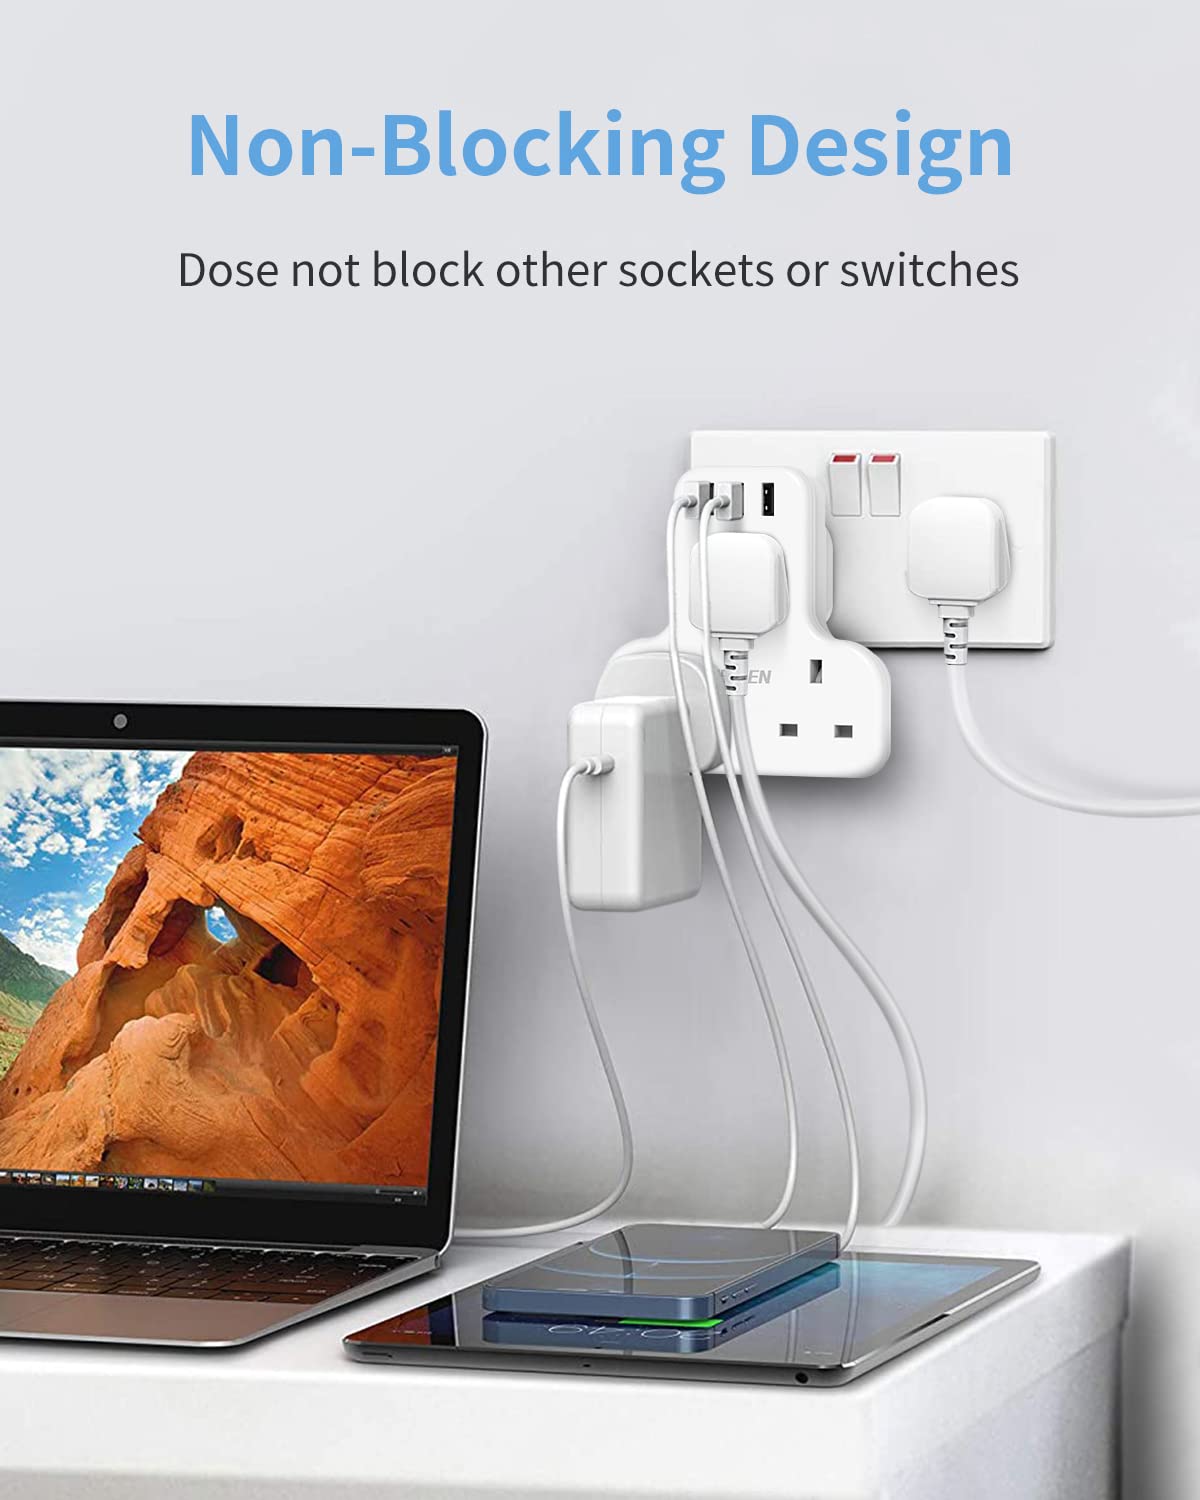 Mscien 3 Way Plug Extension with USB, Multi Plug Extension Sockets with 3 USB, Wall Plug Adapter Turn 1 into 3, Compact Power Extension Adapter